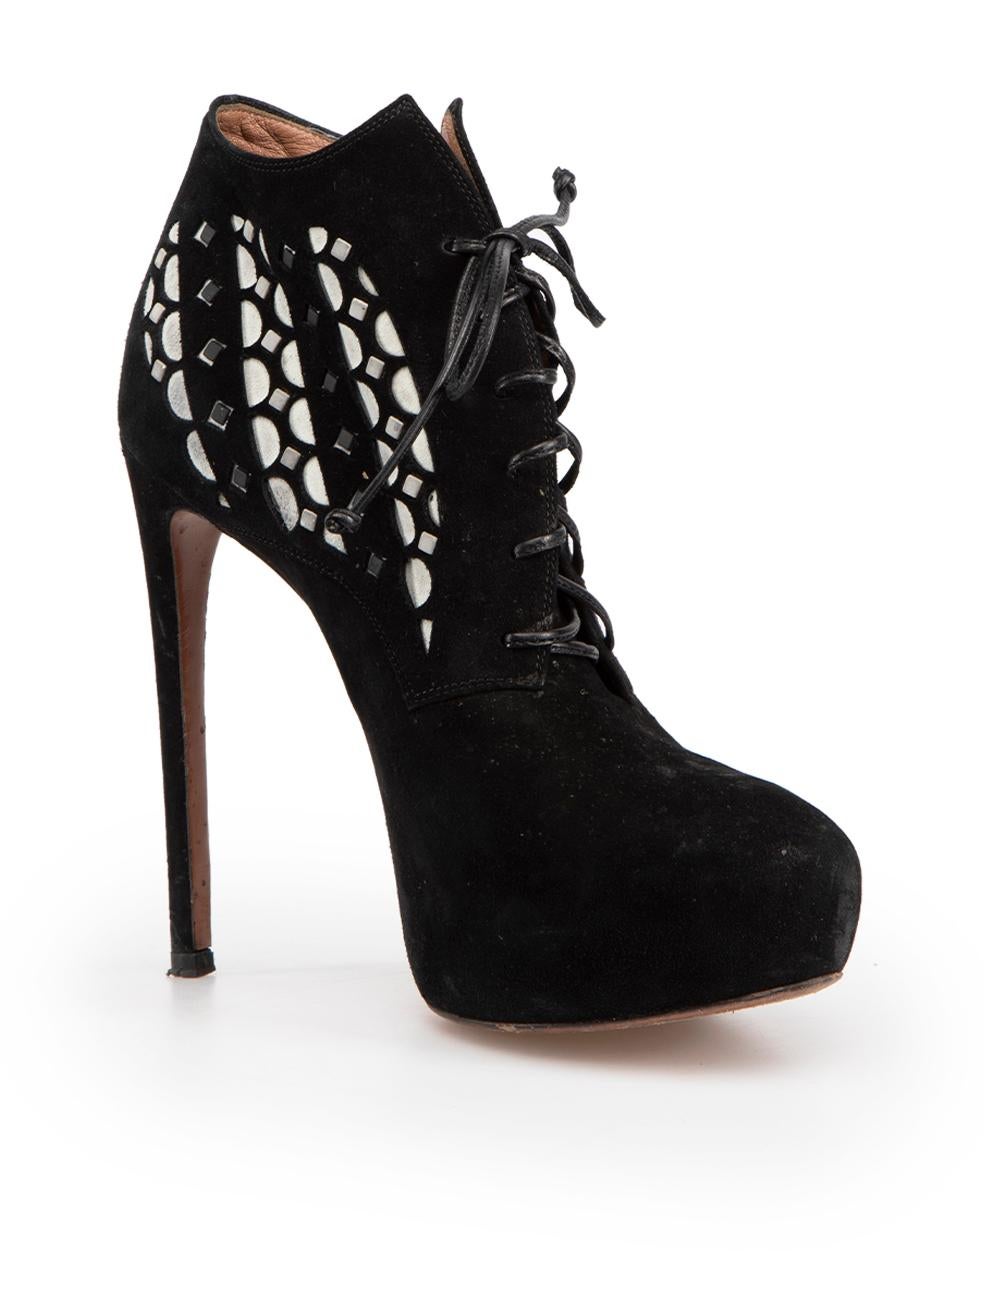 CONDITION is Good. General wear to shoes is evident. Moderate signs of wear to both sides, heels and toes of both boots with abrasions to the suede on this used Alaïa designer resale item.
 
 Details
 Black
 Suede
 Heels
 Platform
 High heeled
